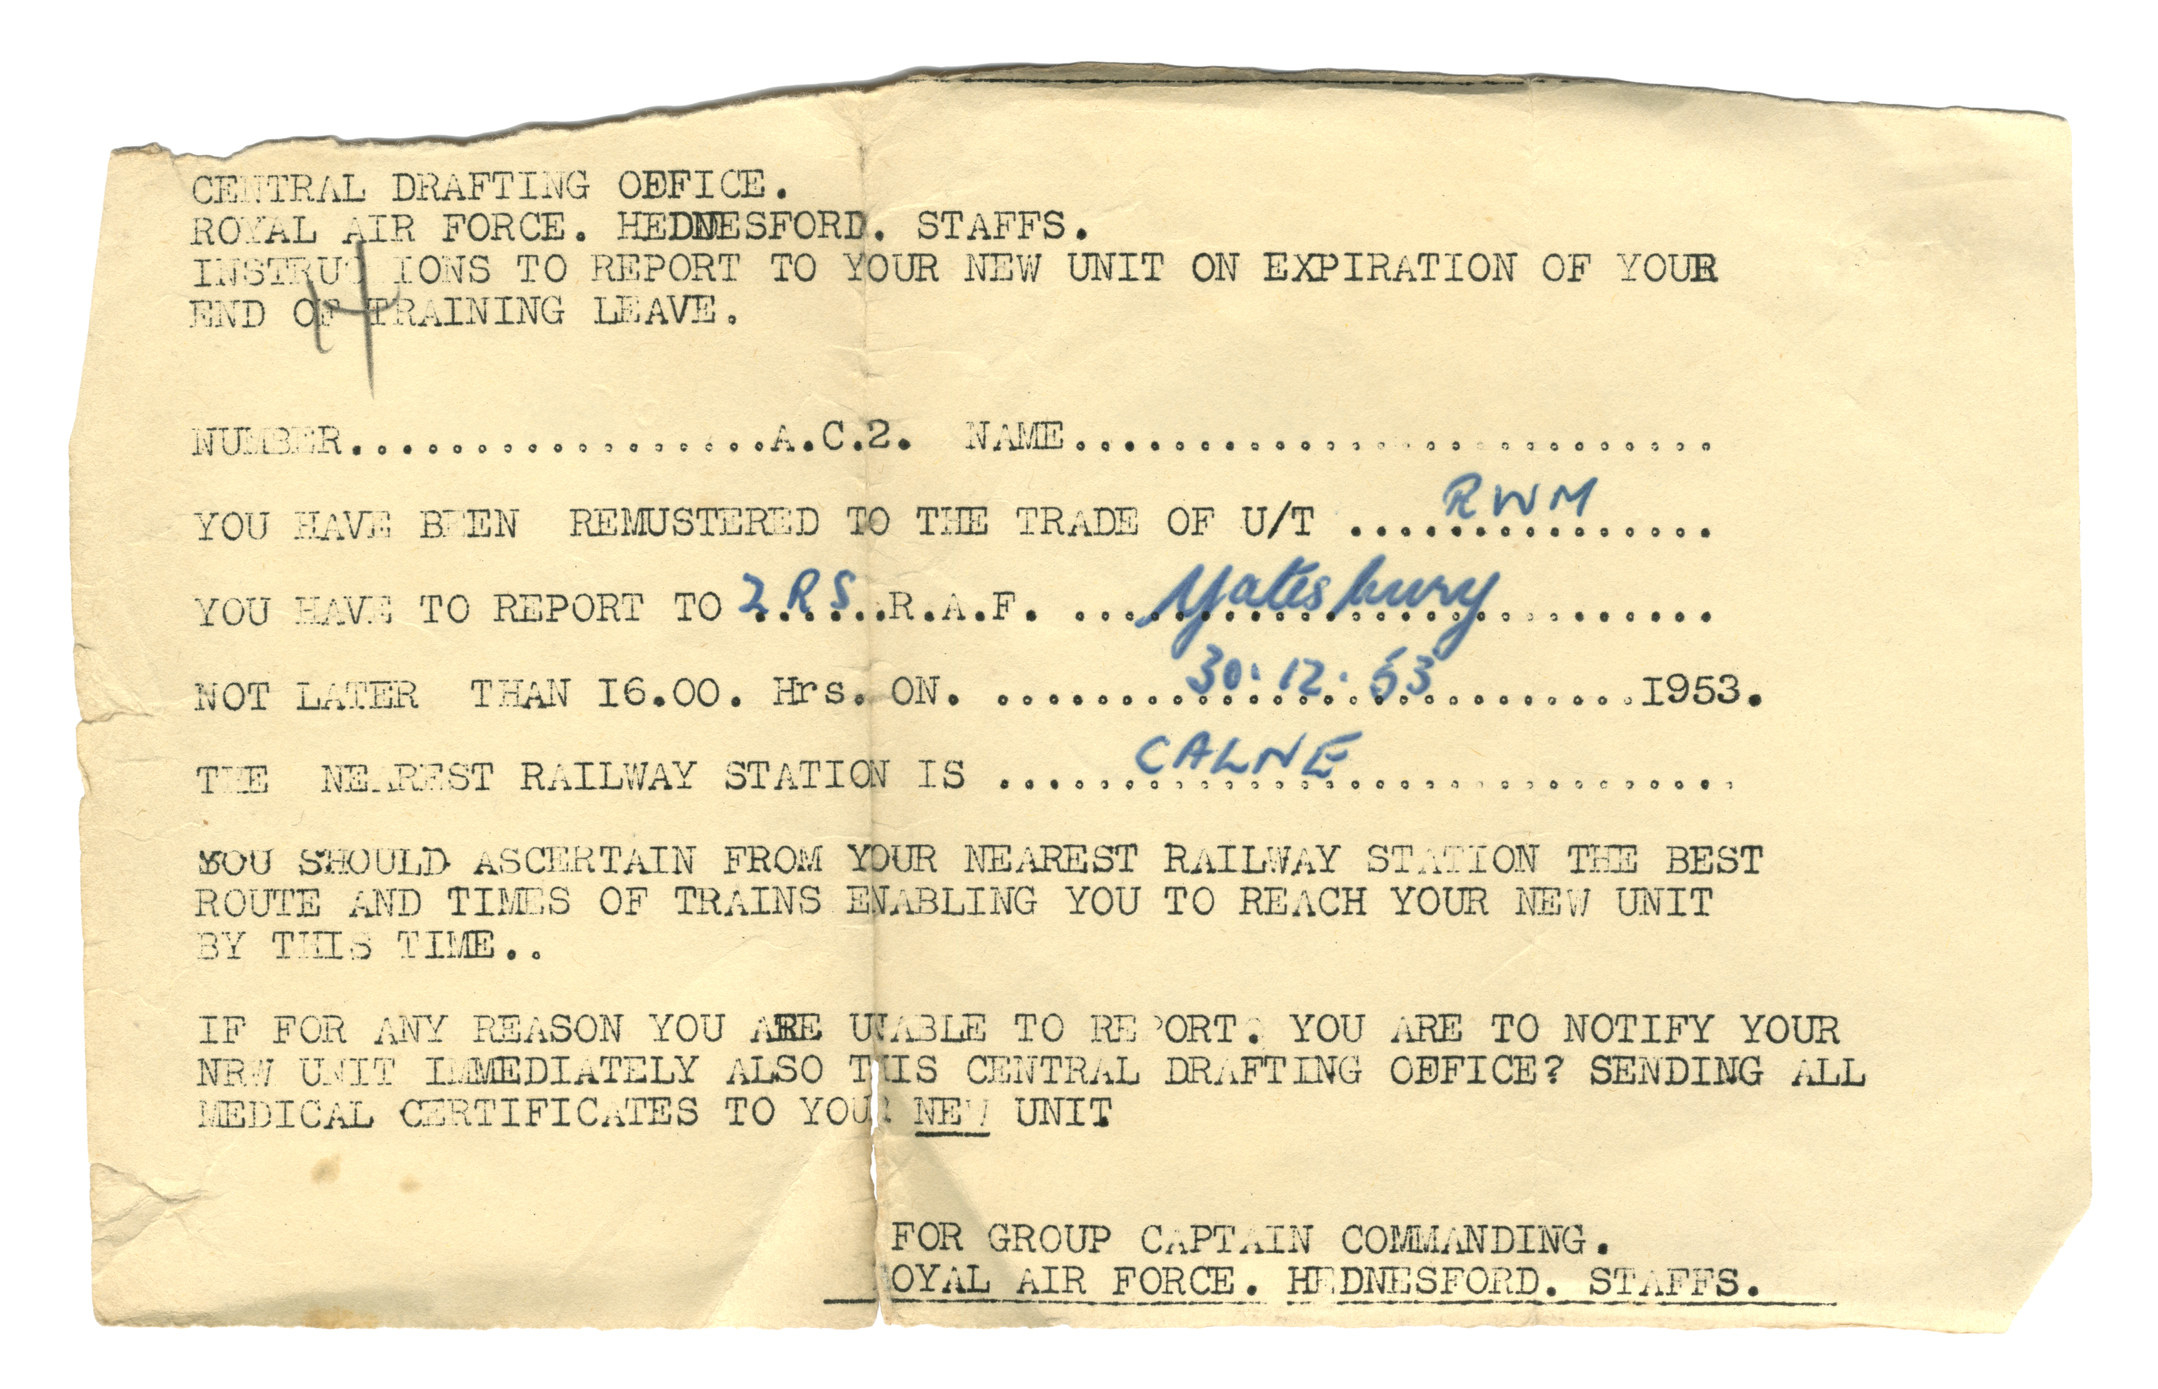 A military draft notice from 1953